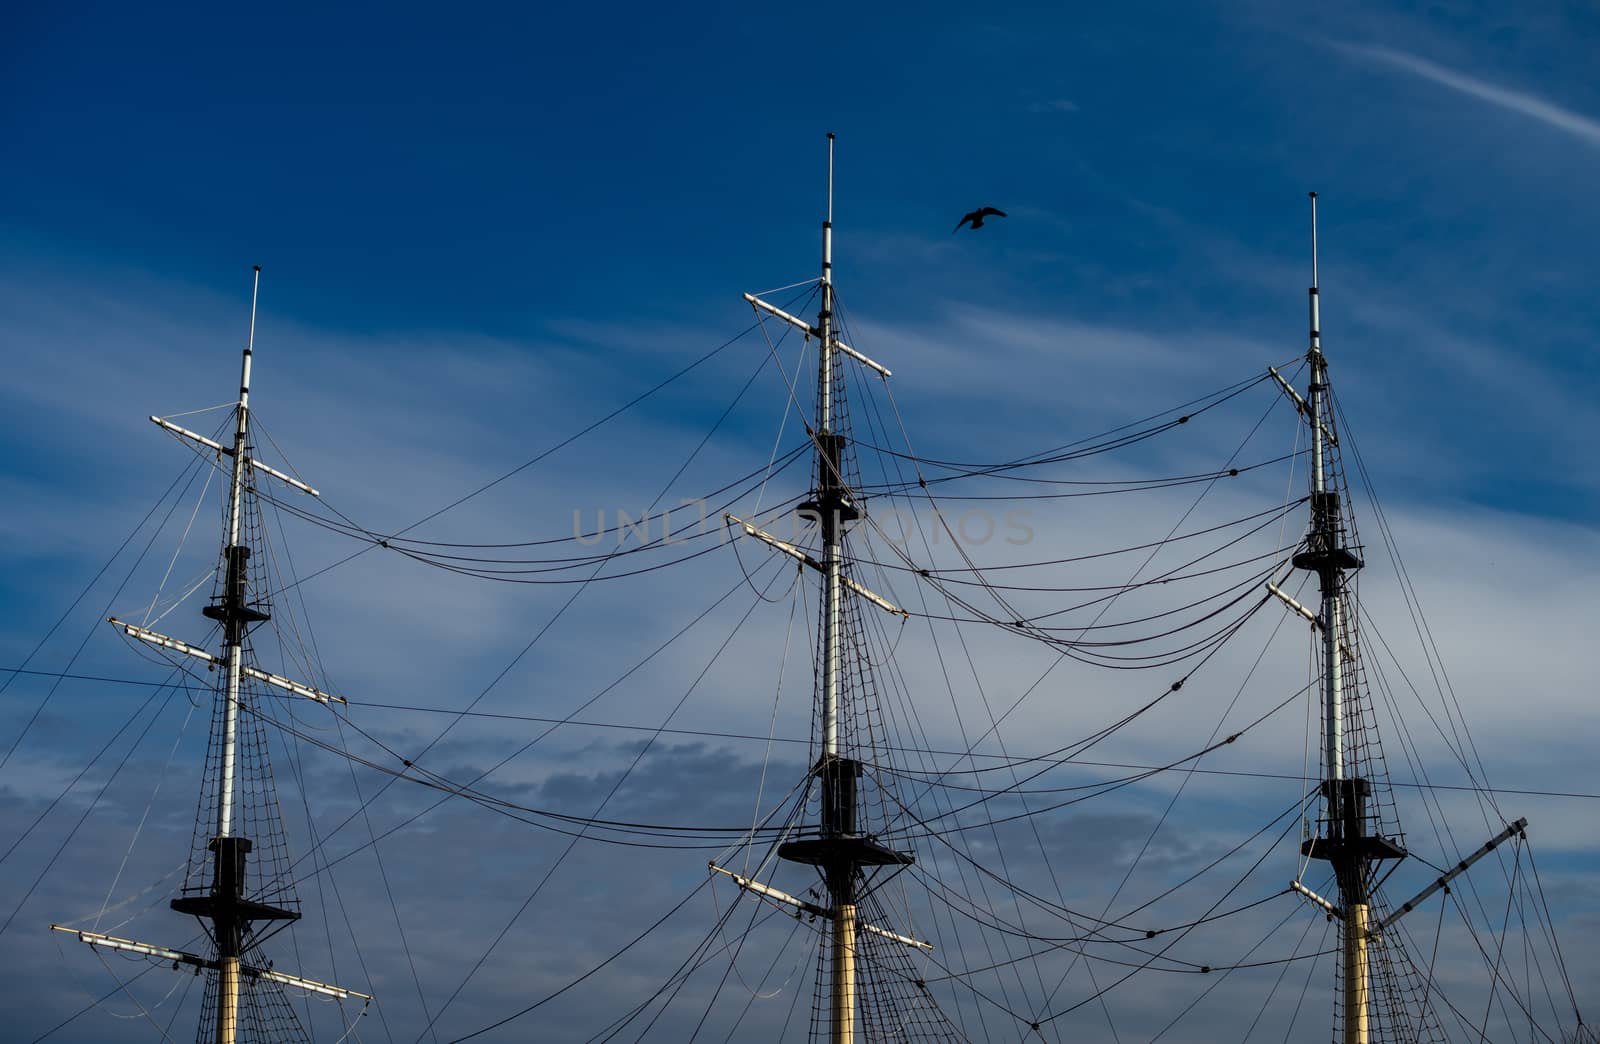 Masts of a ship without sails against the blue sky